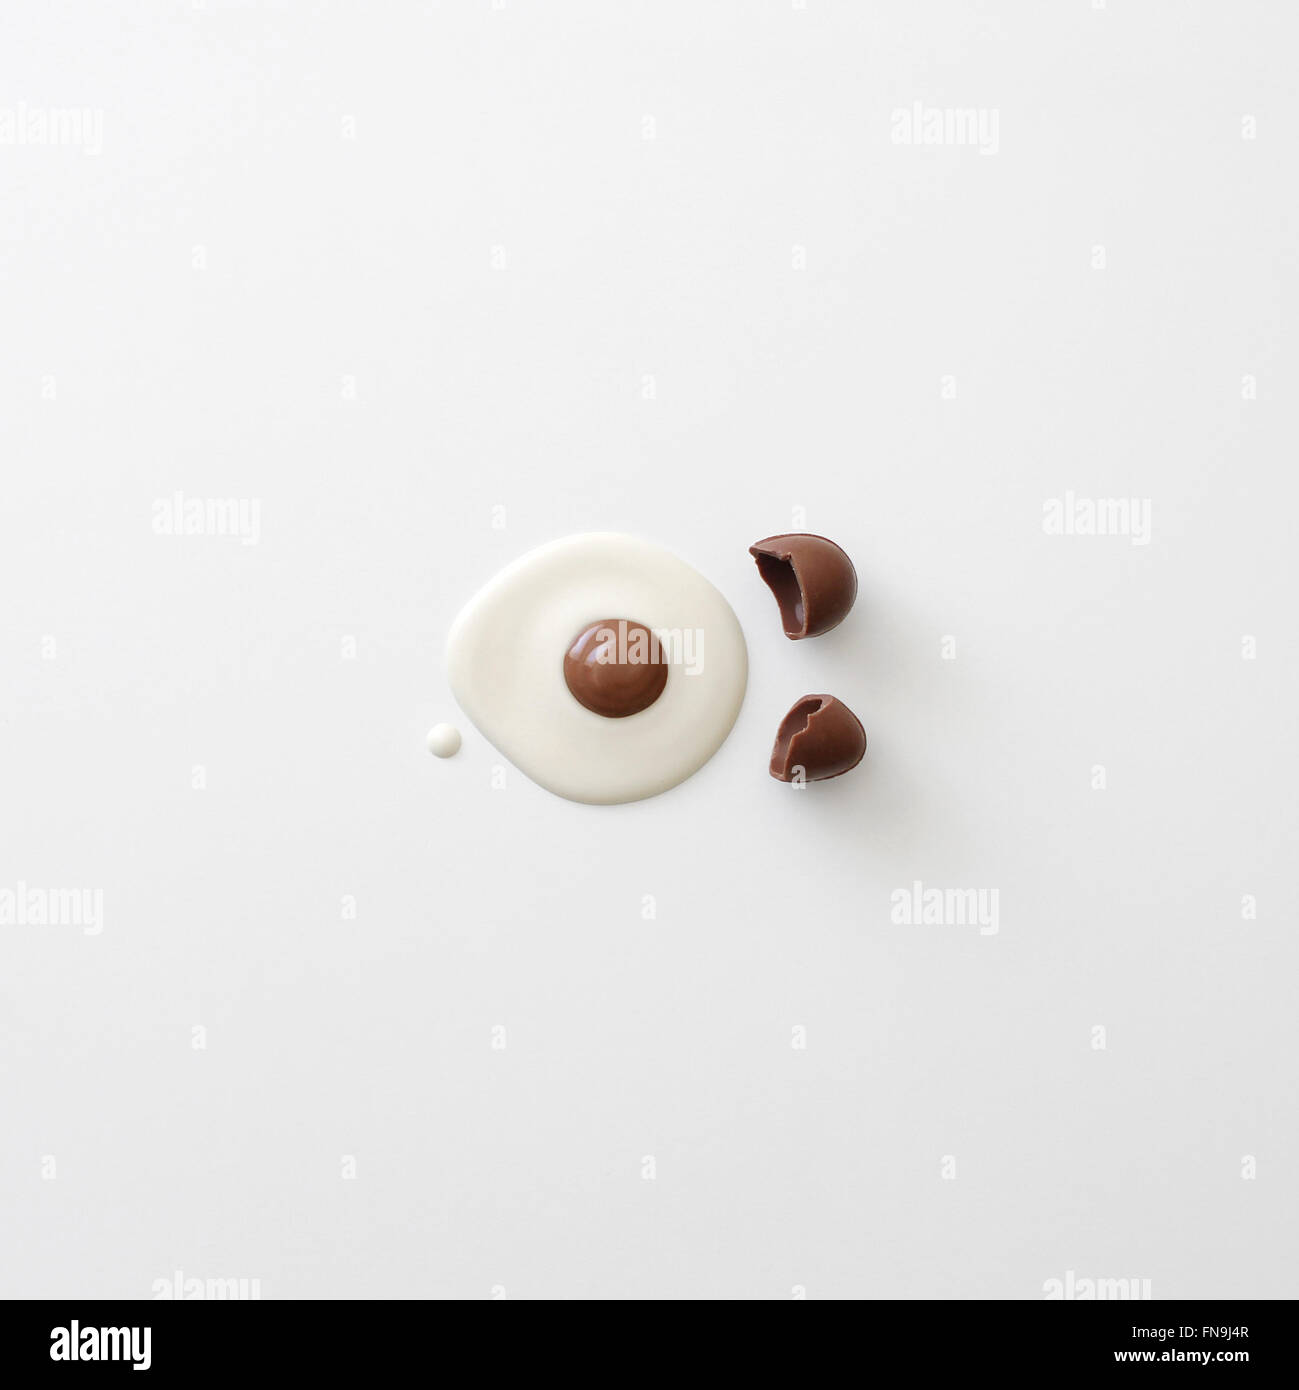 Conceptual cracked egg made of white and milk chocolate Stock Photo